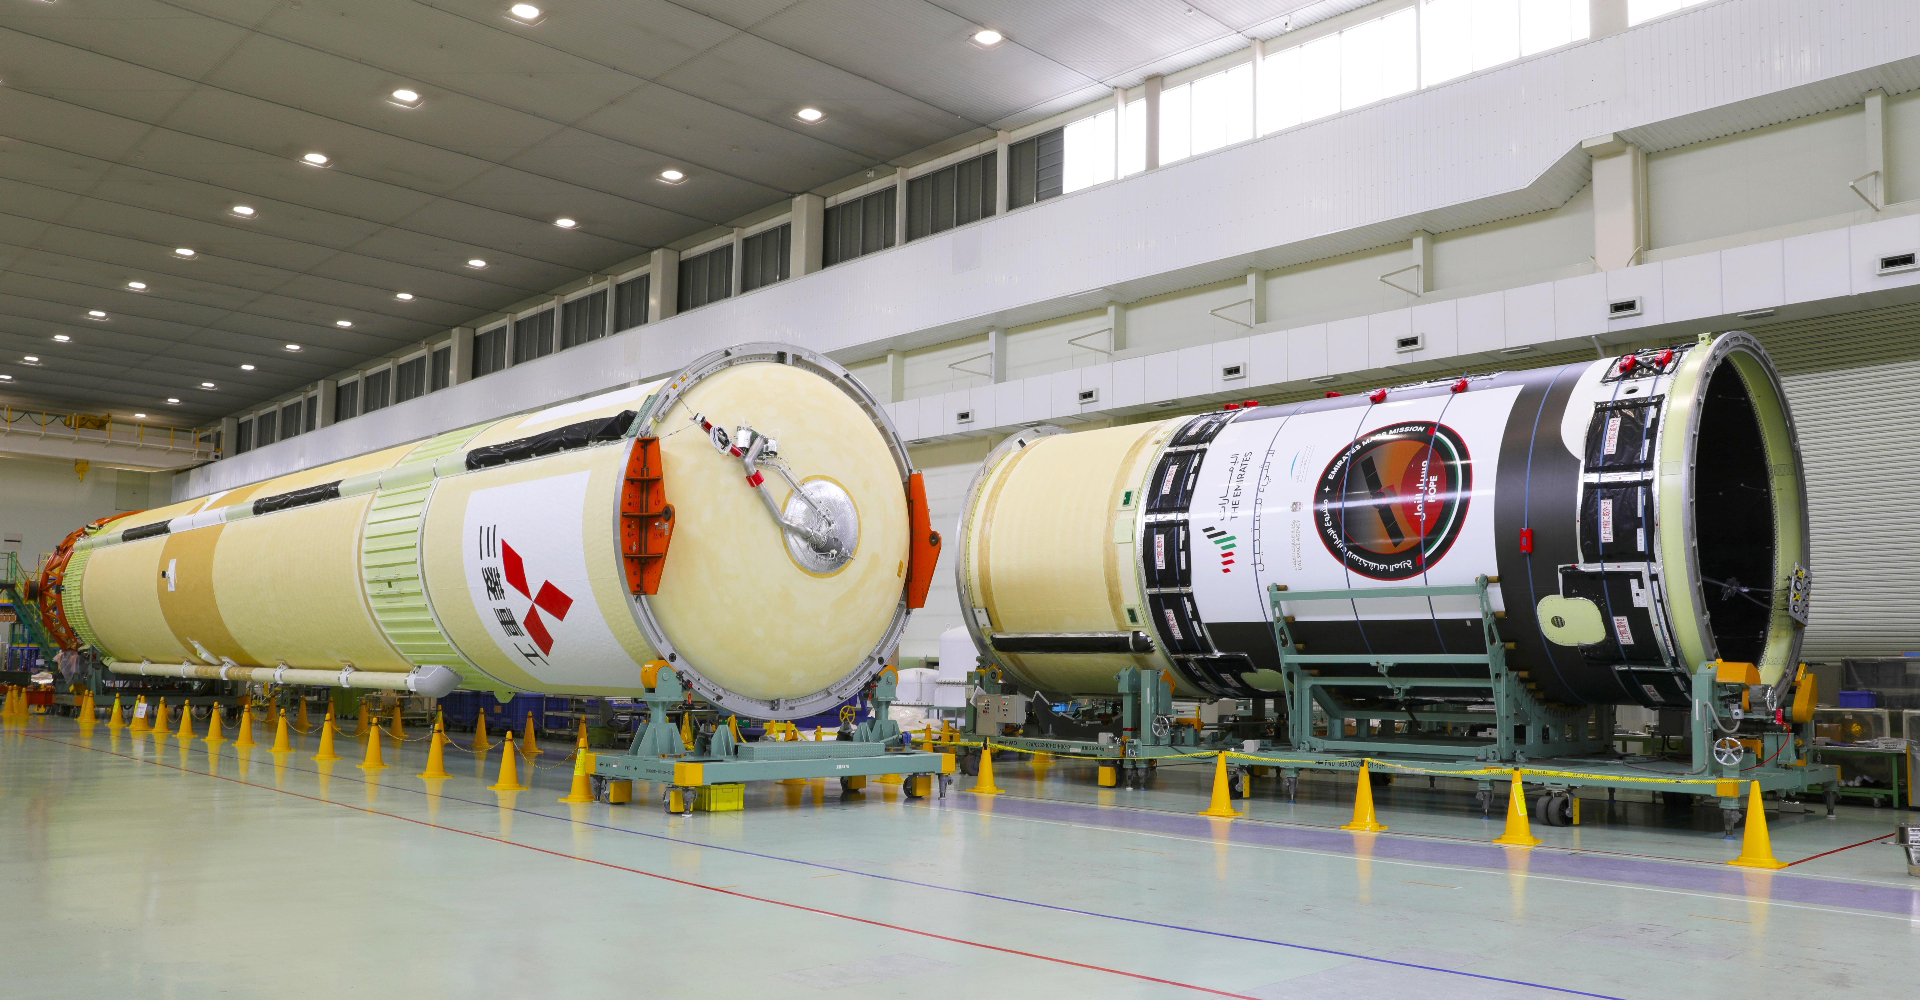 The two main stages of Hope’s H-IIA rocket before assembly and launch.